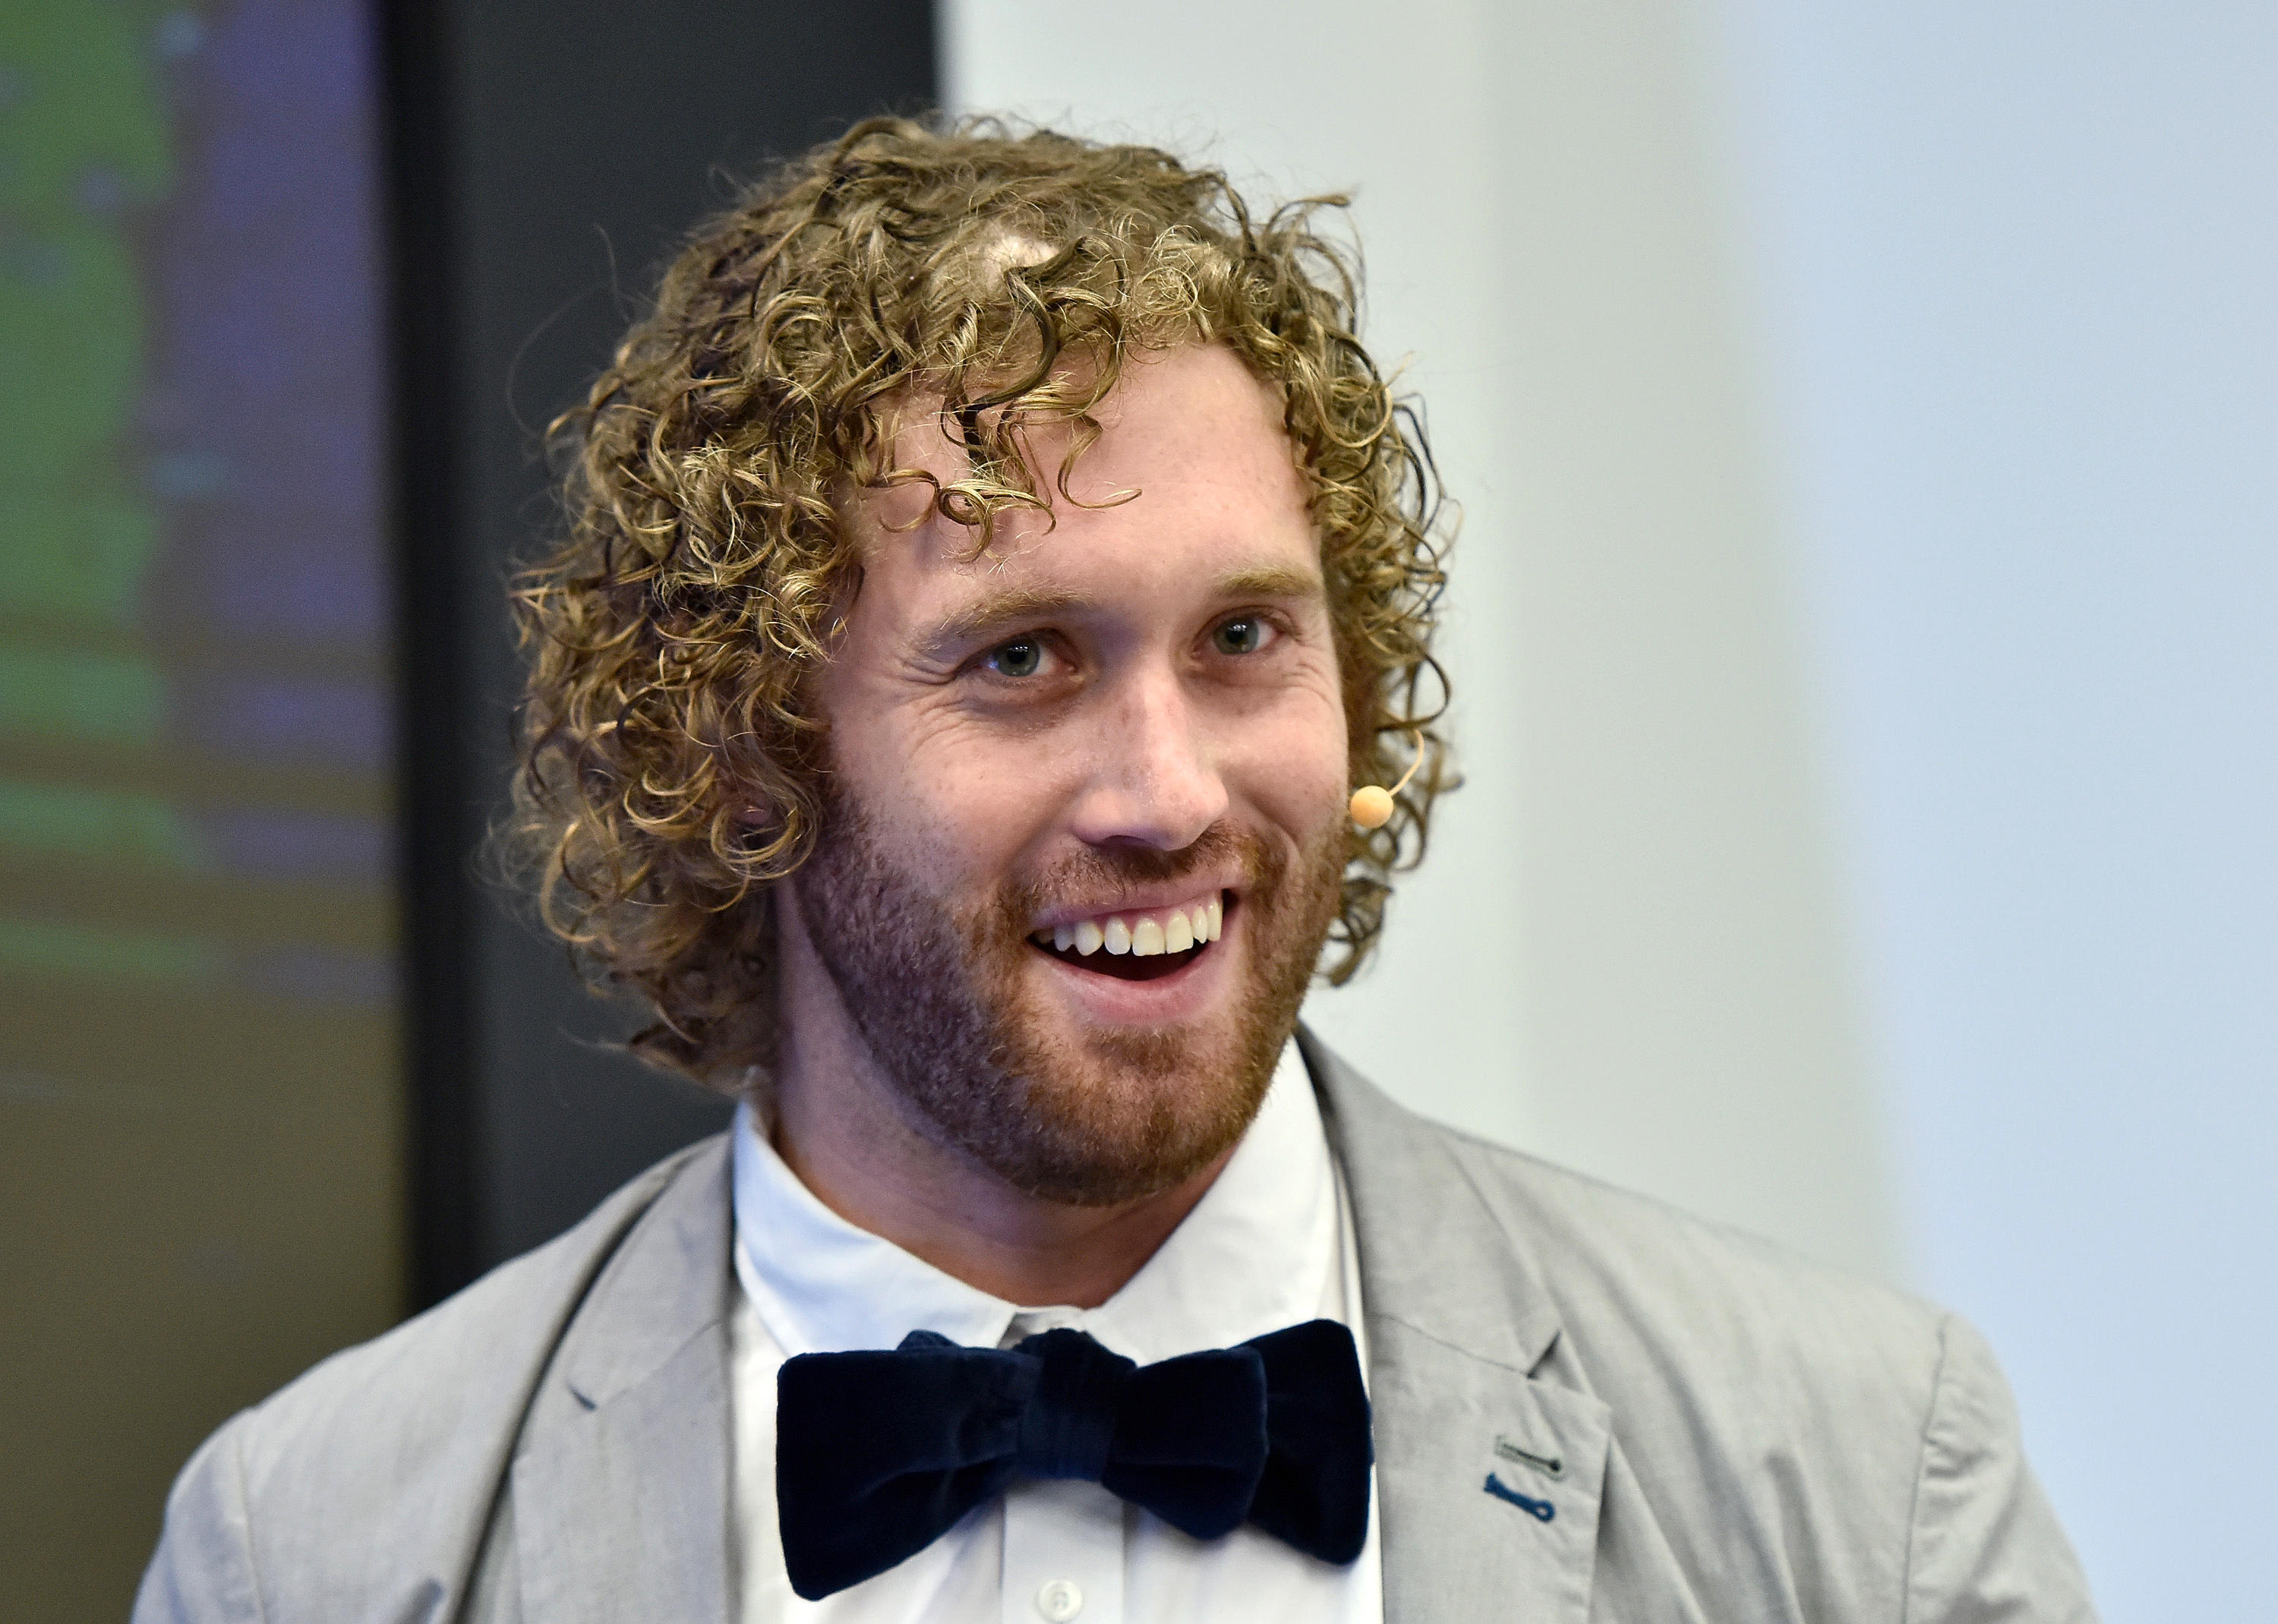 First Accused of Sexual Assault, Comedian T.J. Miller 